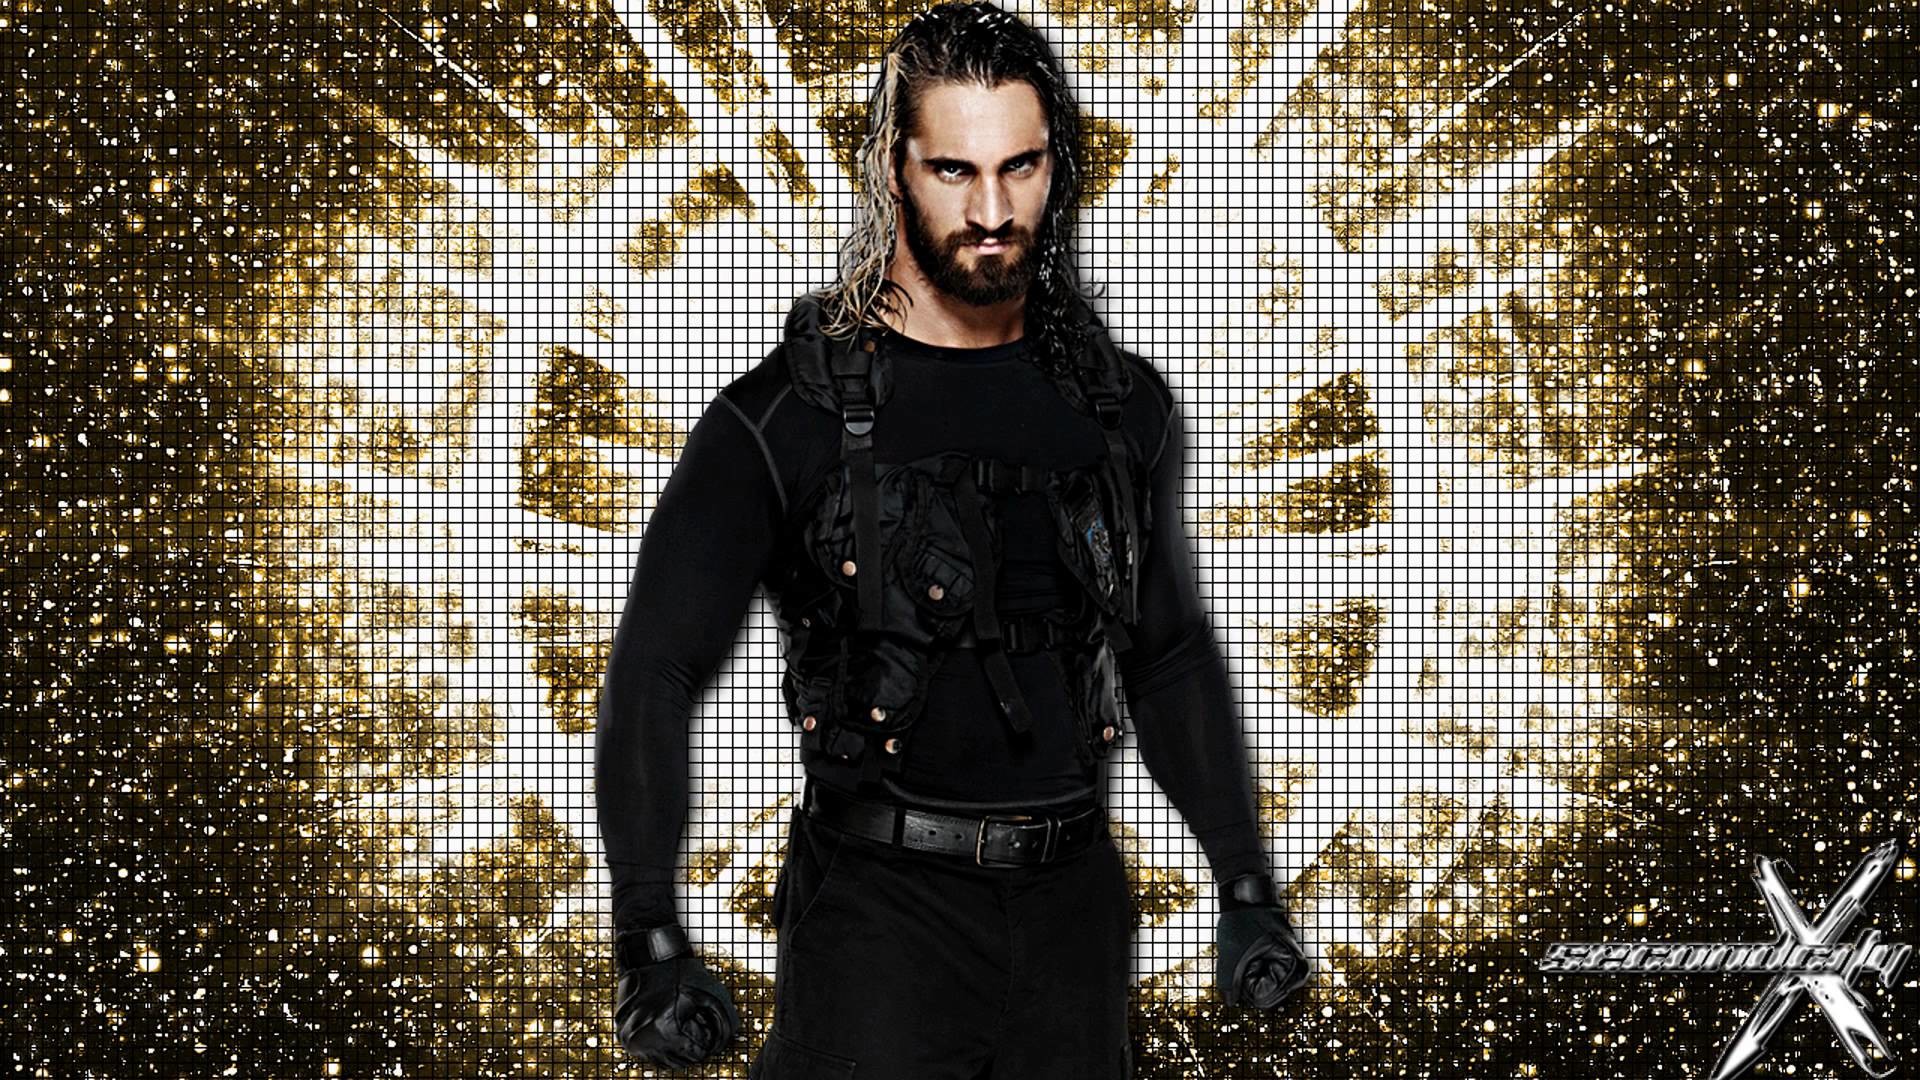 Wwe Superstars Hintergrund With A Chainlink Fence And - Seth Rollins 1st Theme Song - HD Wallpaper 